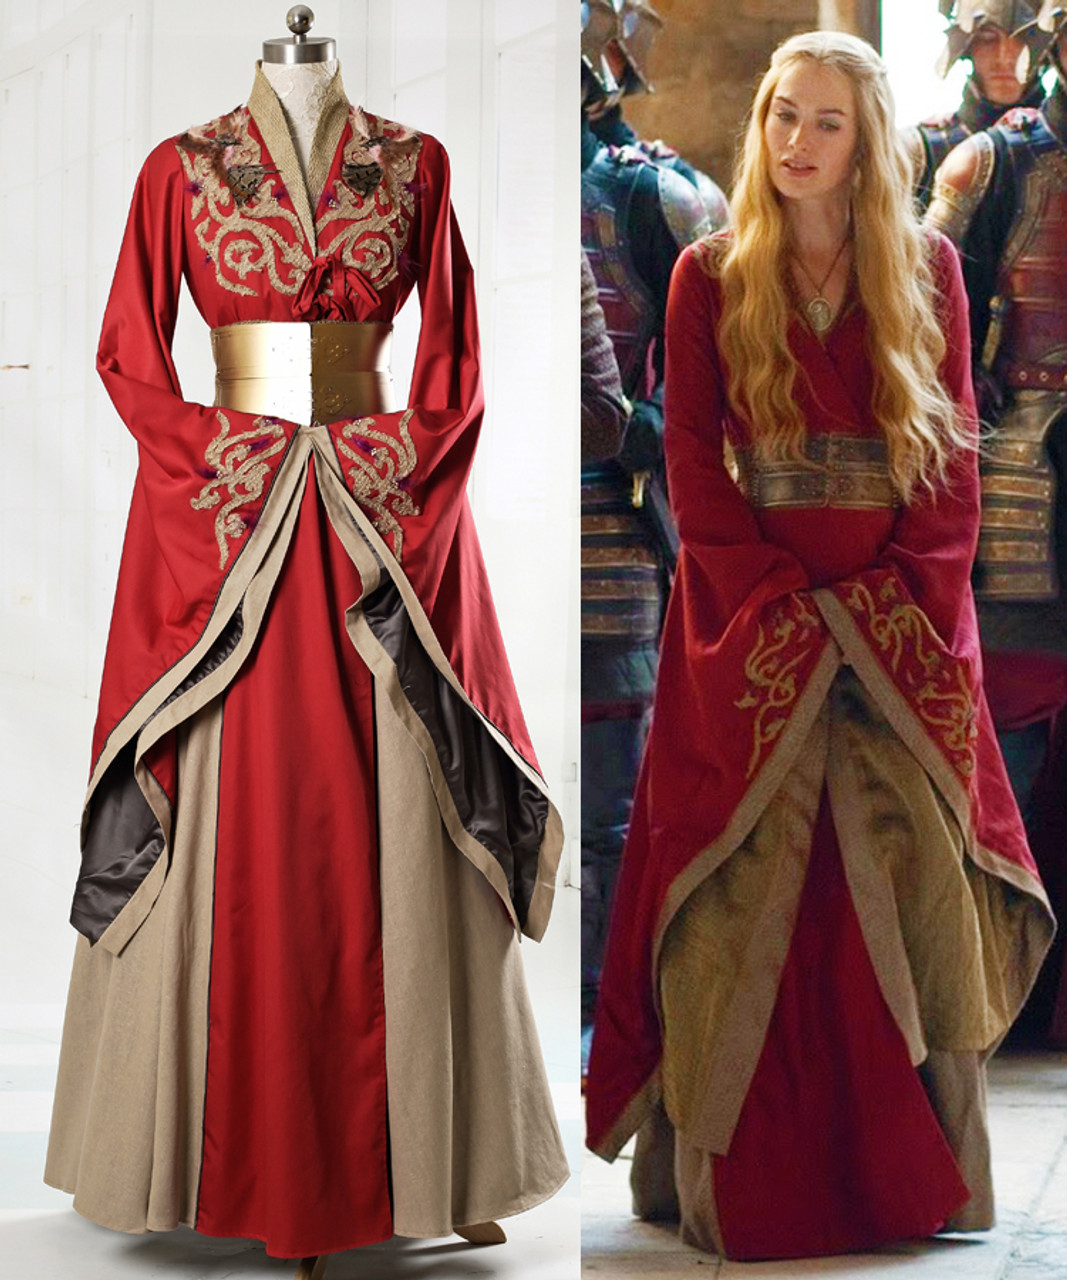 Game of Thrones (TV Series) Cosplay, Cersei Lannister Gown & Corset Costume  Set